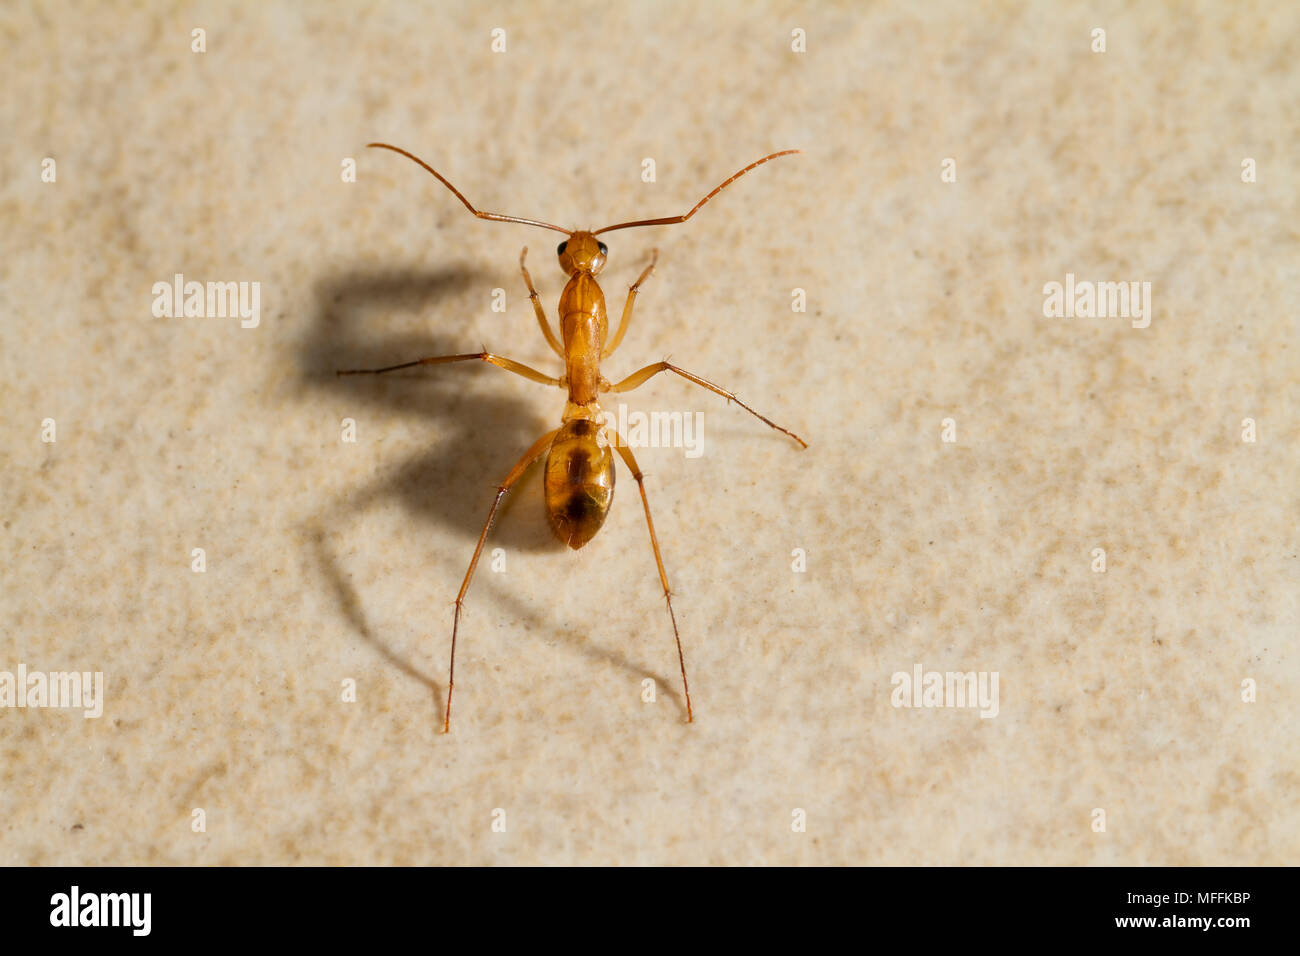 YELLOW CRAZY ANT (Anoplolepis gracilipes) worker ant, an invasive species causing problems for a number of ecosystems throughout the world.  This one Stock Photo